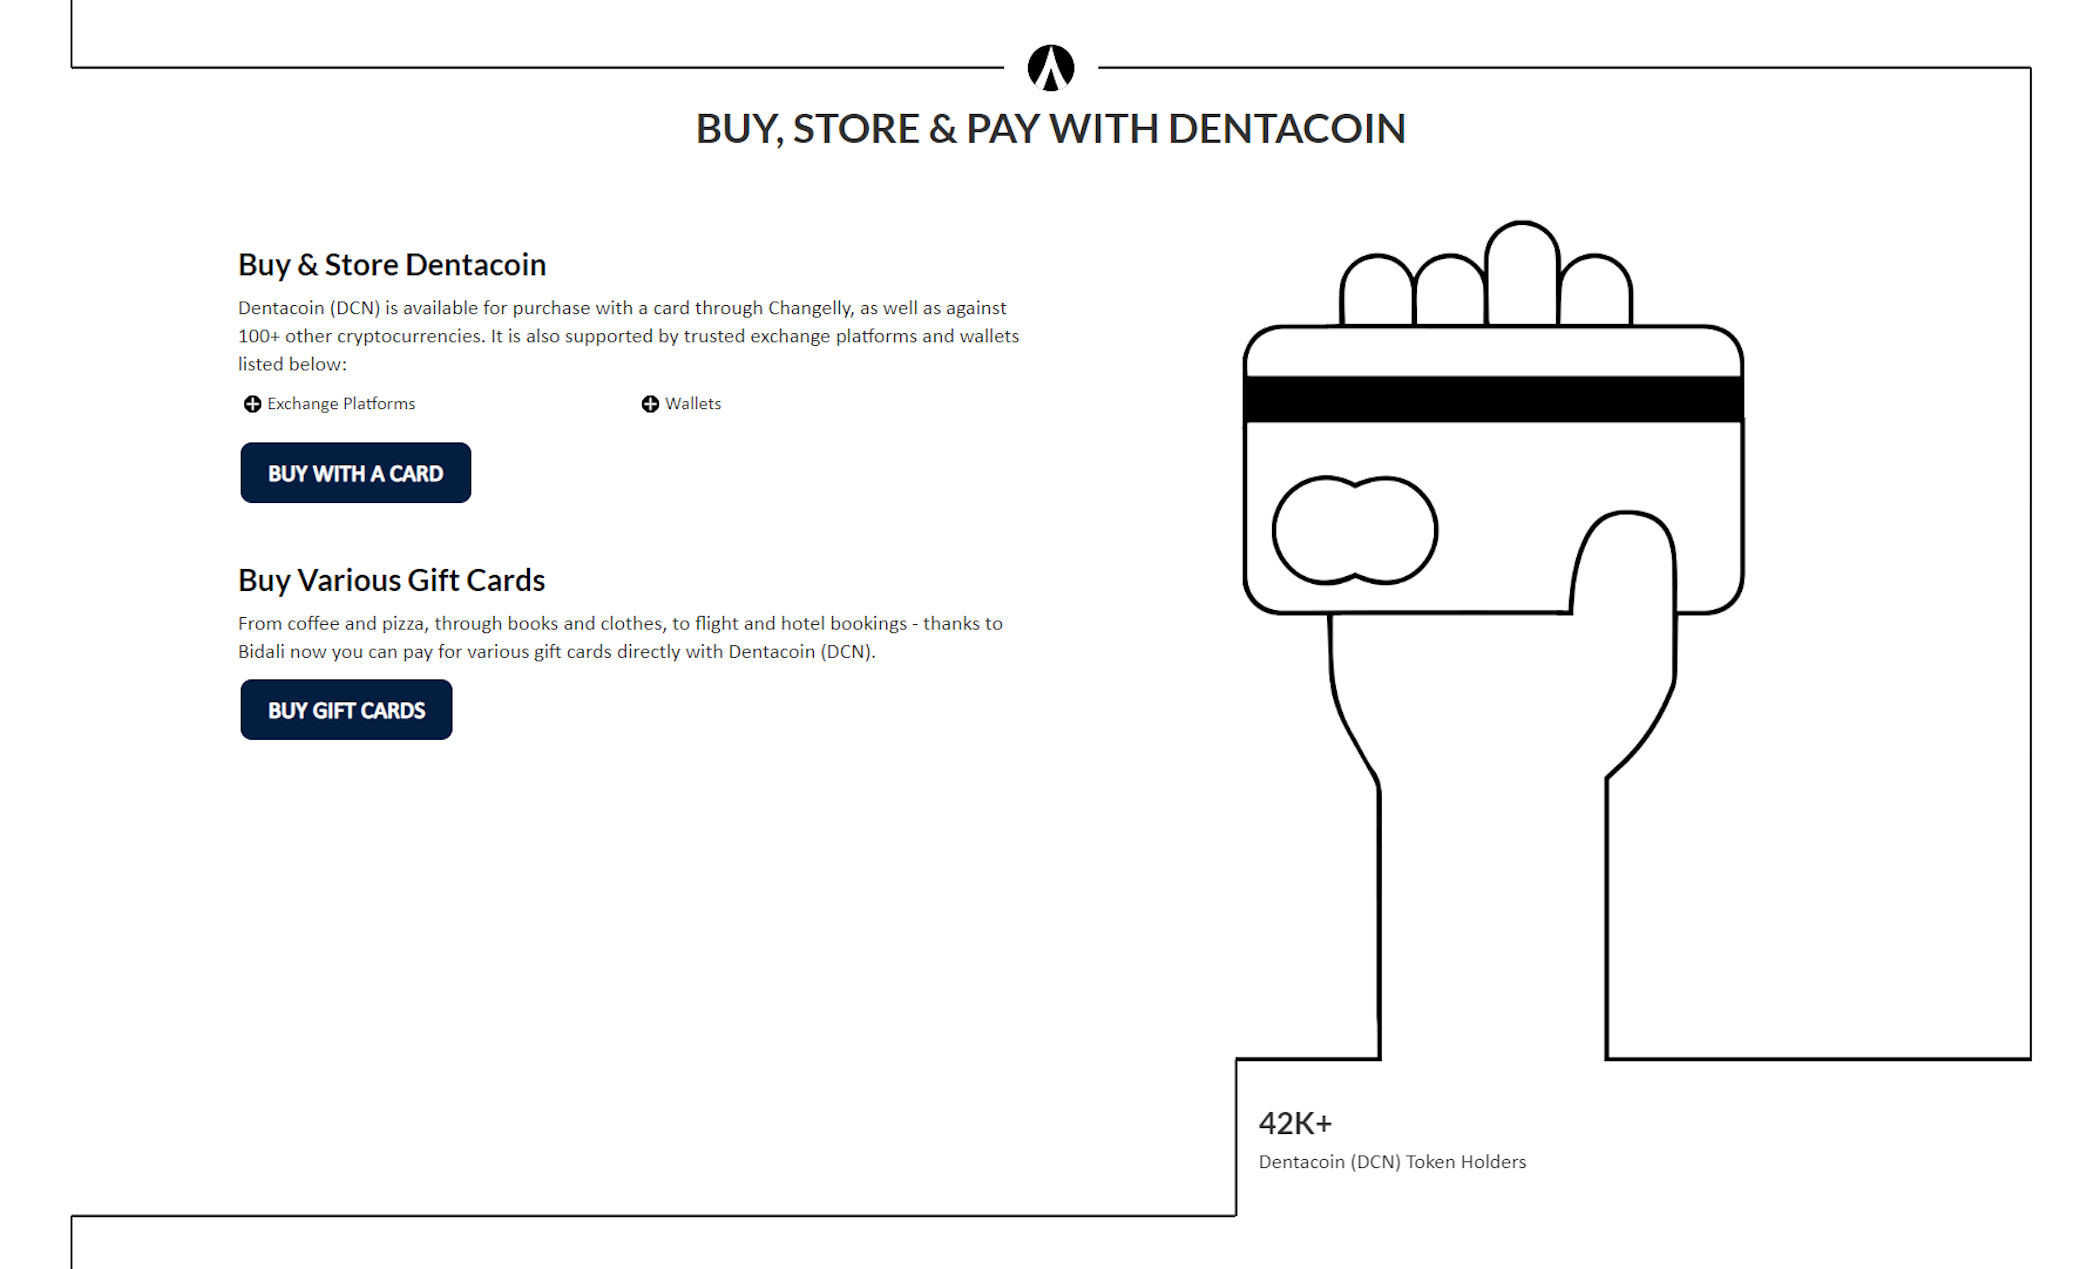 Dentacoin (DCN) is a digital currency that is used to reward patients for their activities.